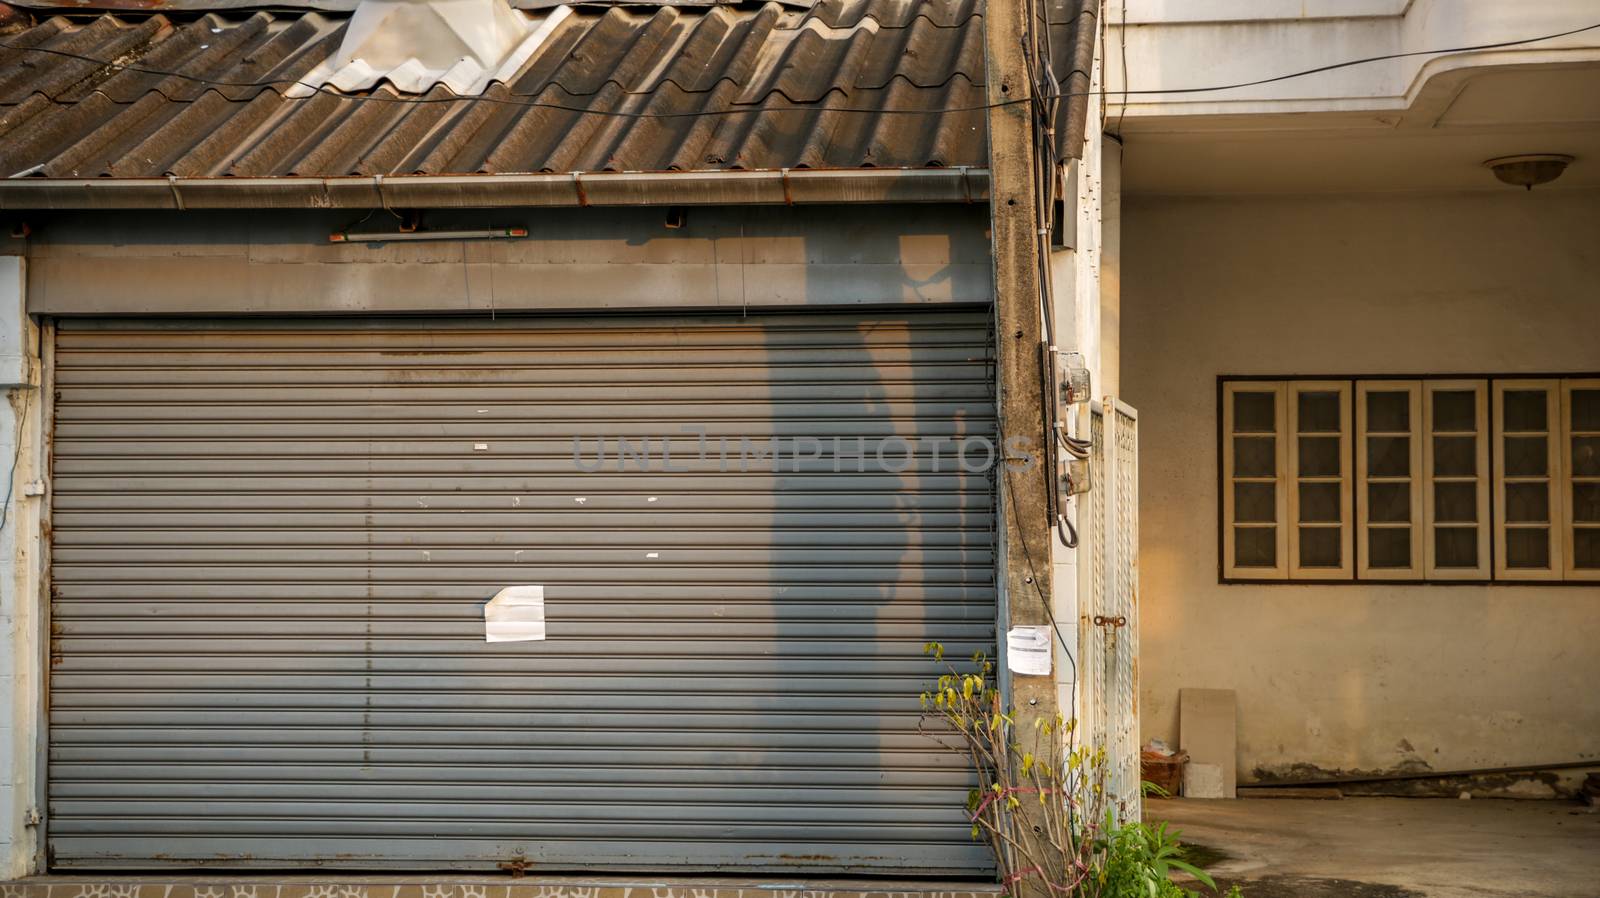 Dirty Vintage Roller Shutter Door with Blank Paper Note - Old Abandoned House for Sale  in Bangkok Thailand. Sunny Warm Day